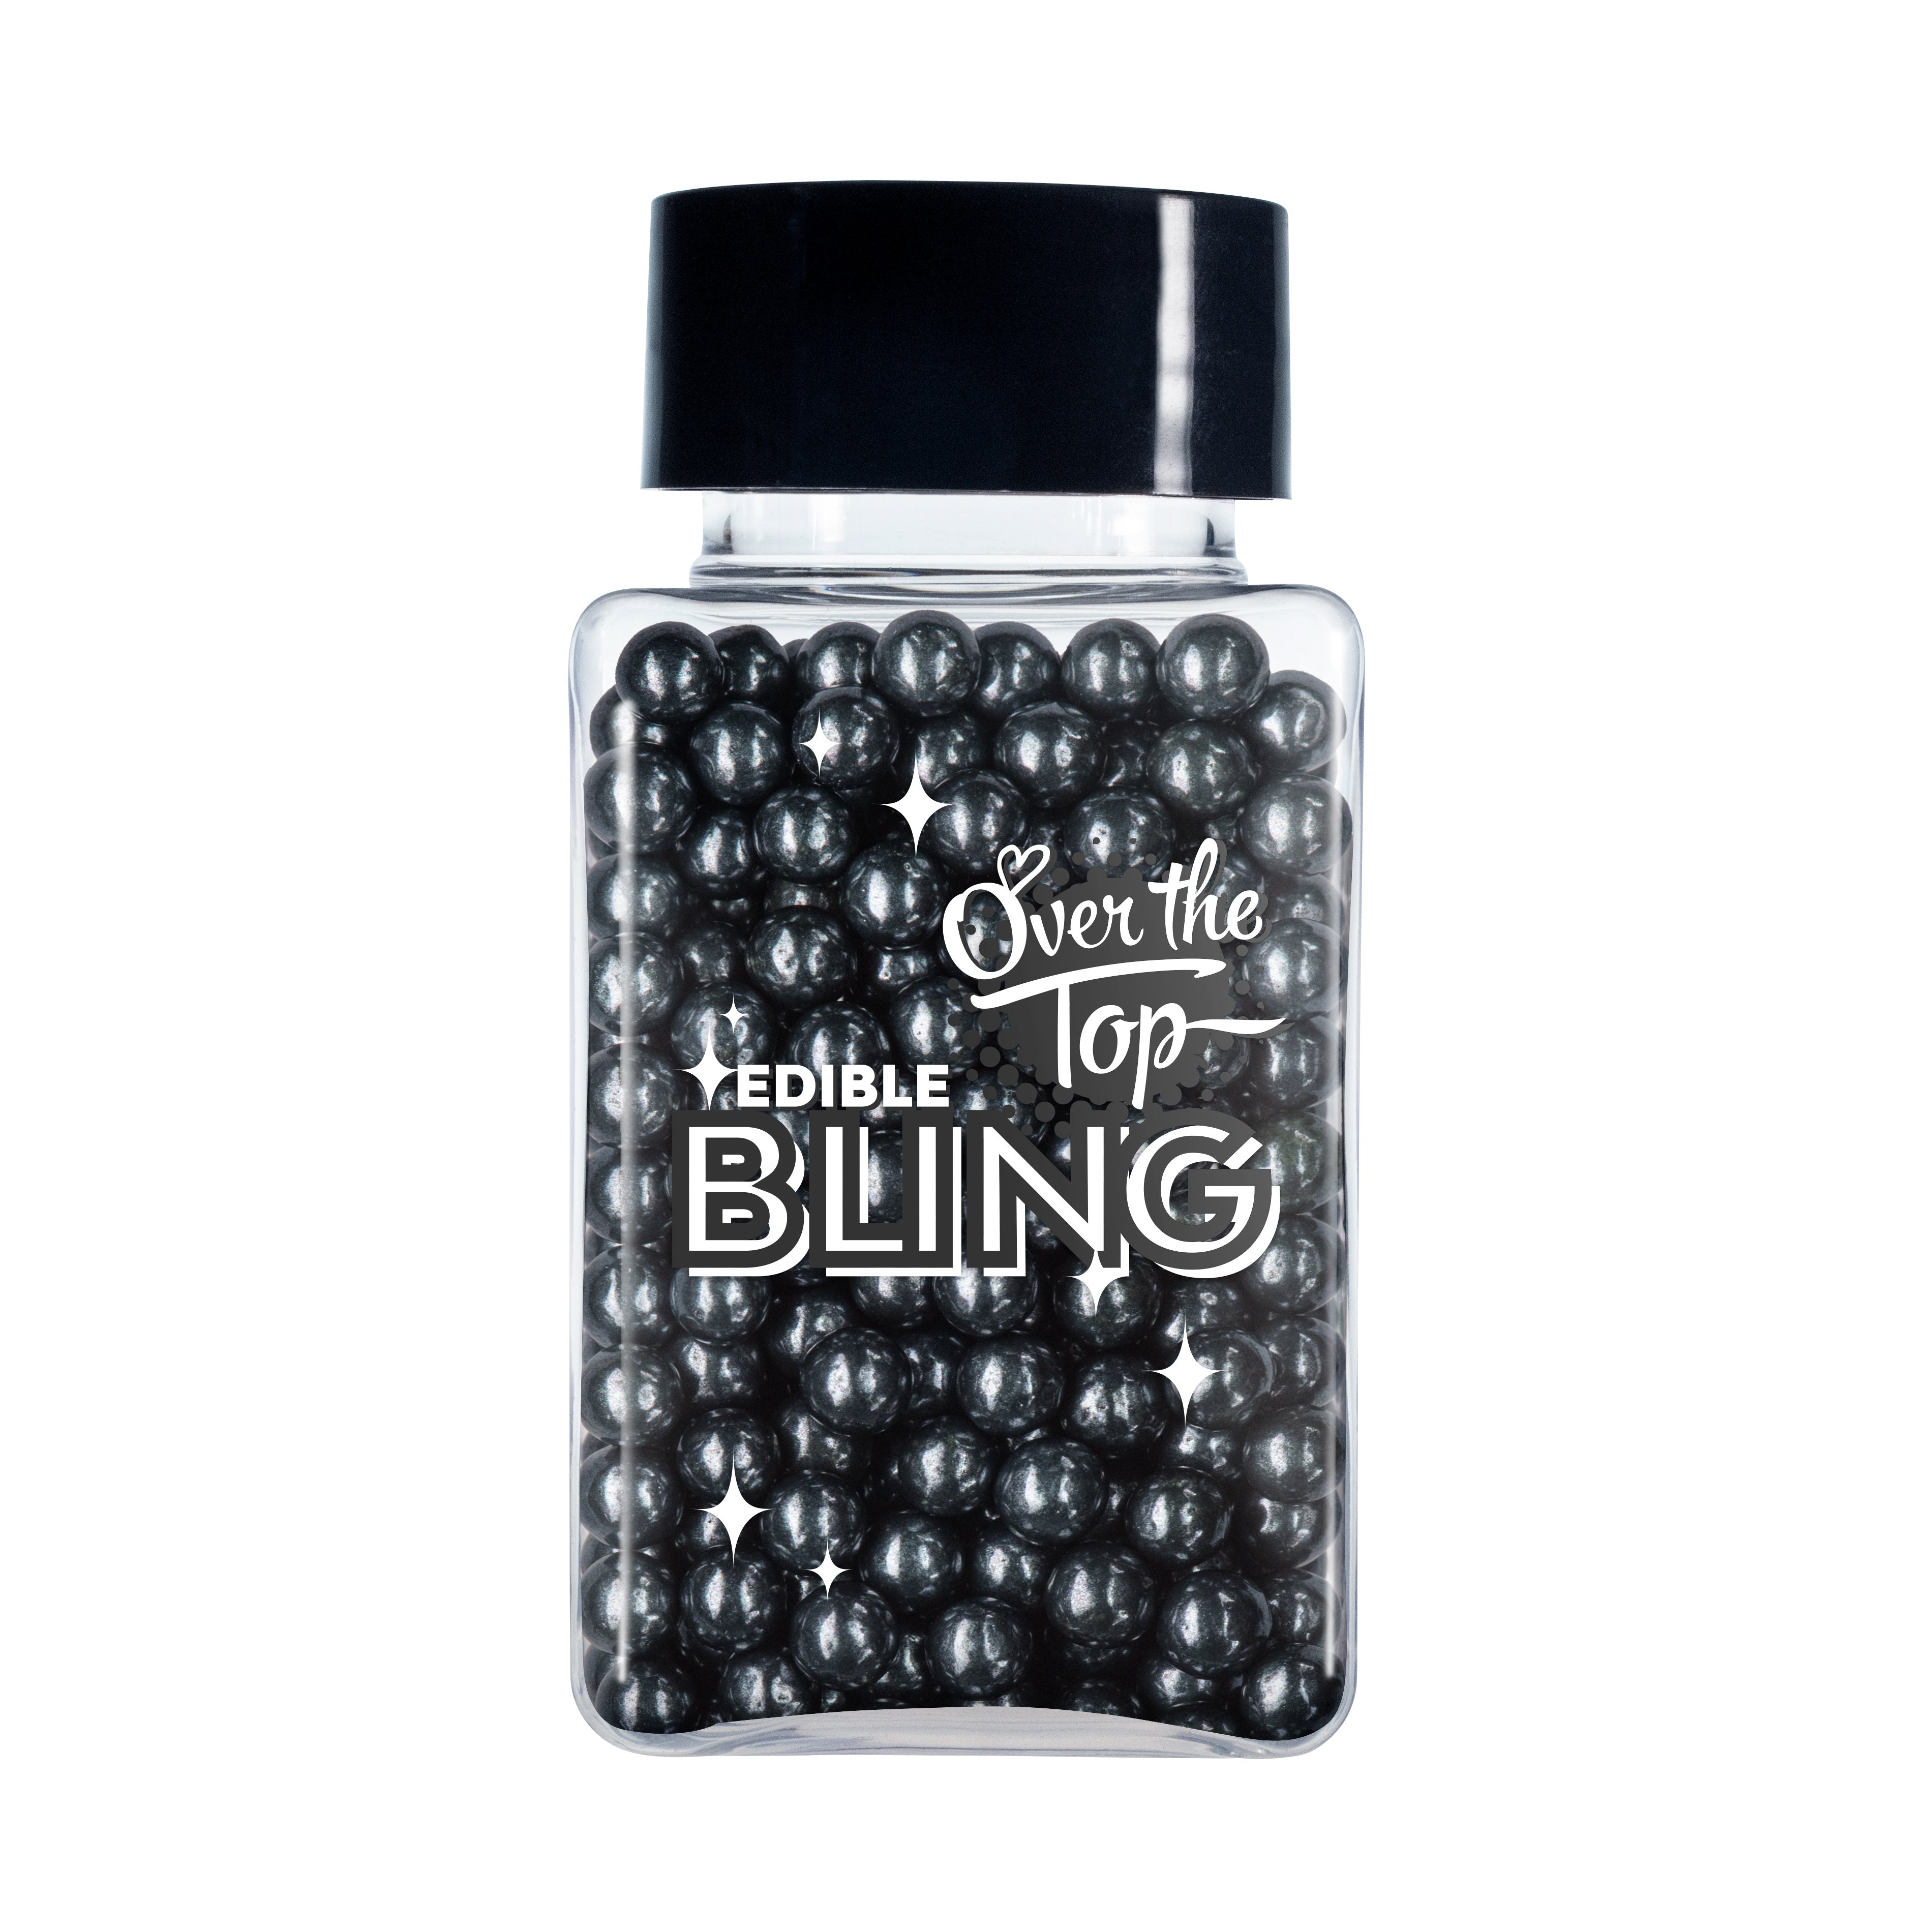 Over The Top Edible Bling Sprinkles - Black Pearls (4mm) 70g